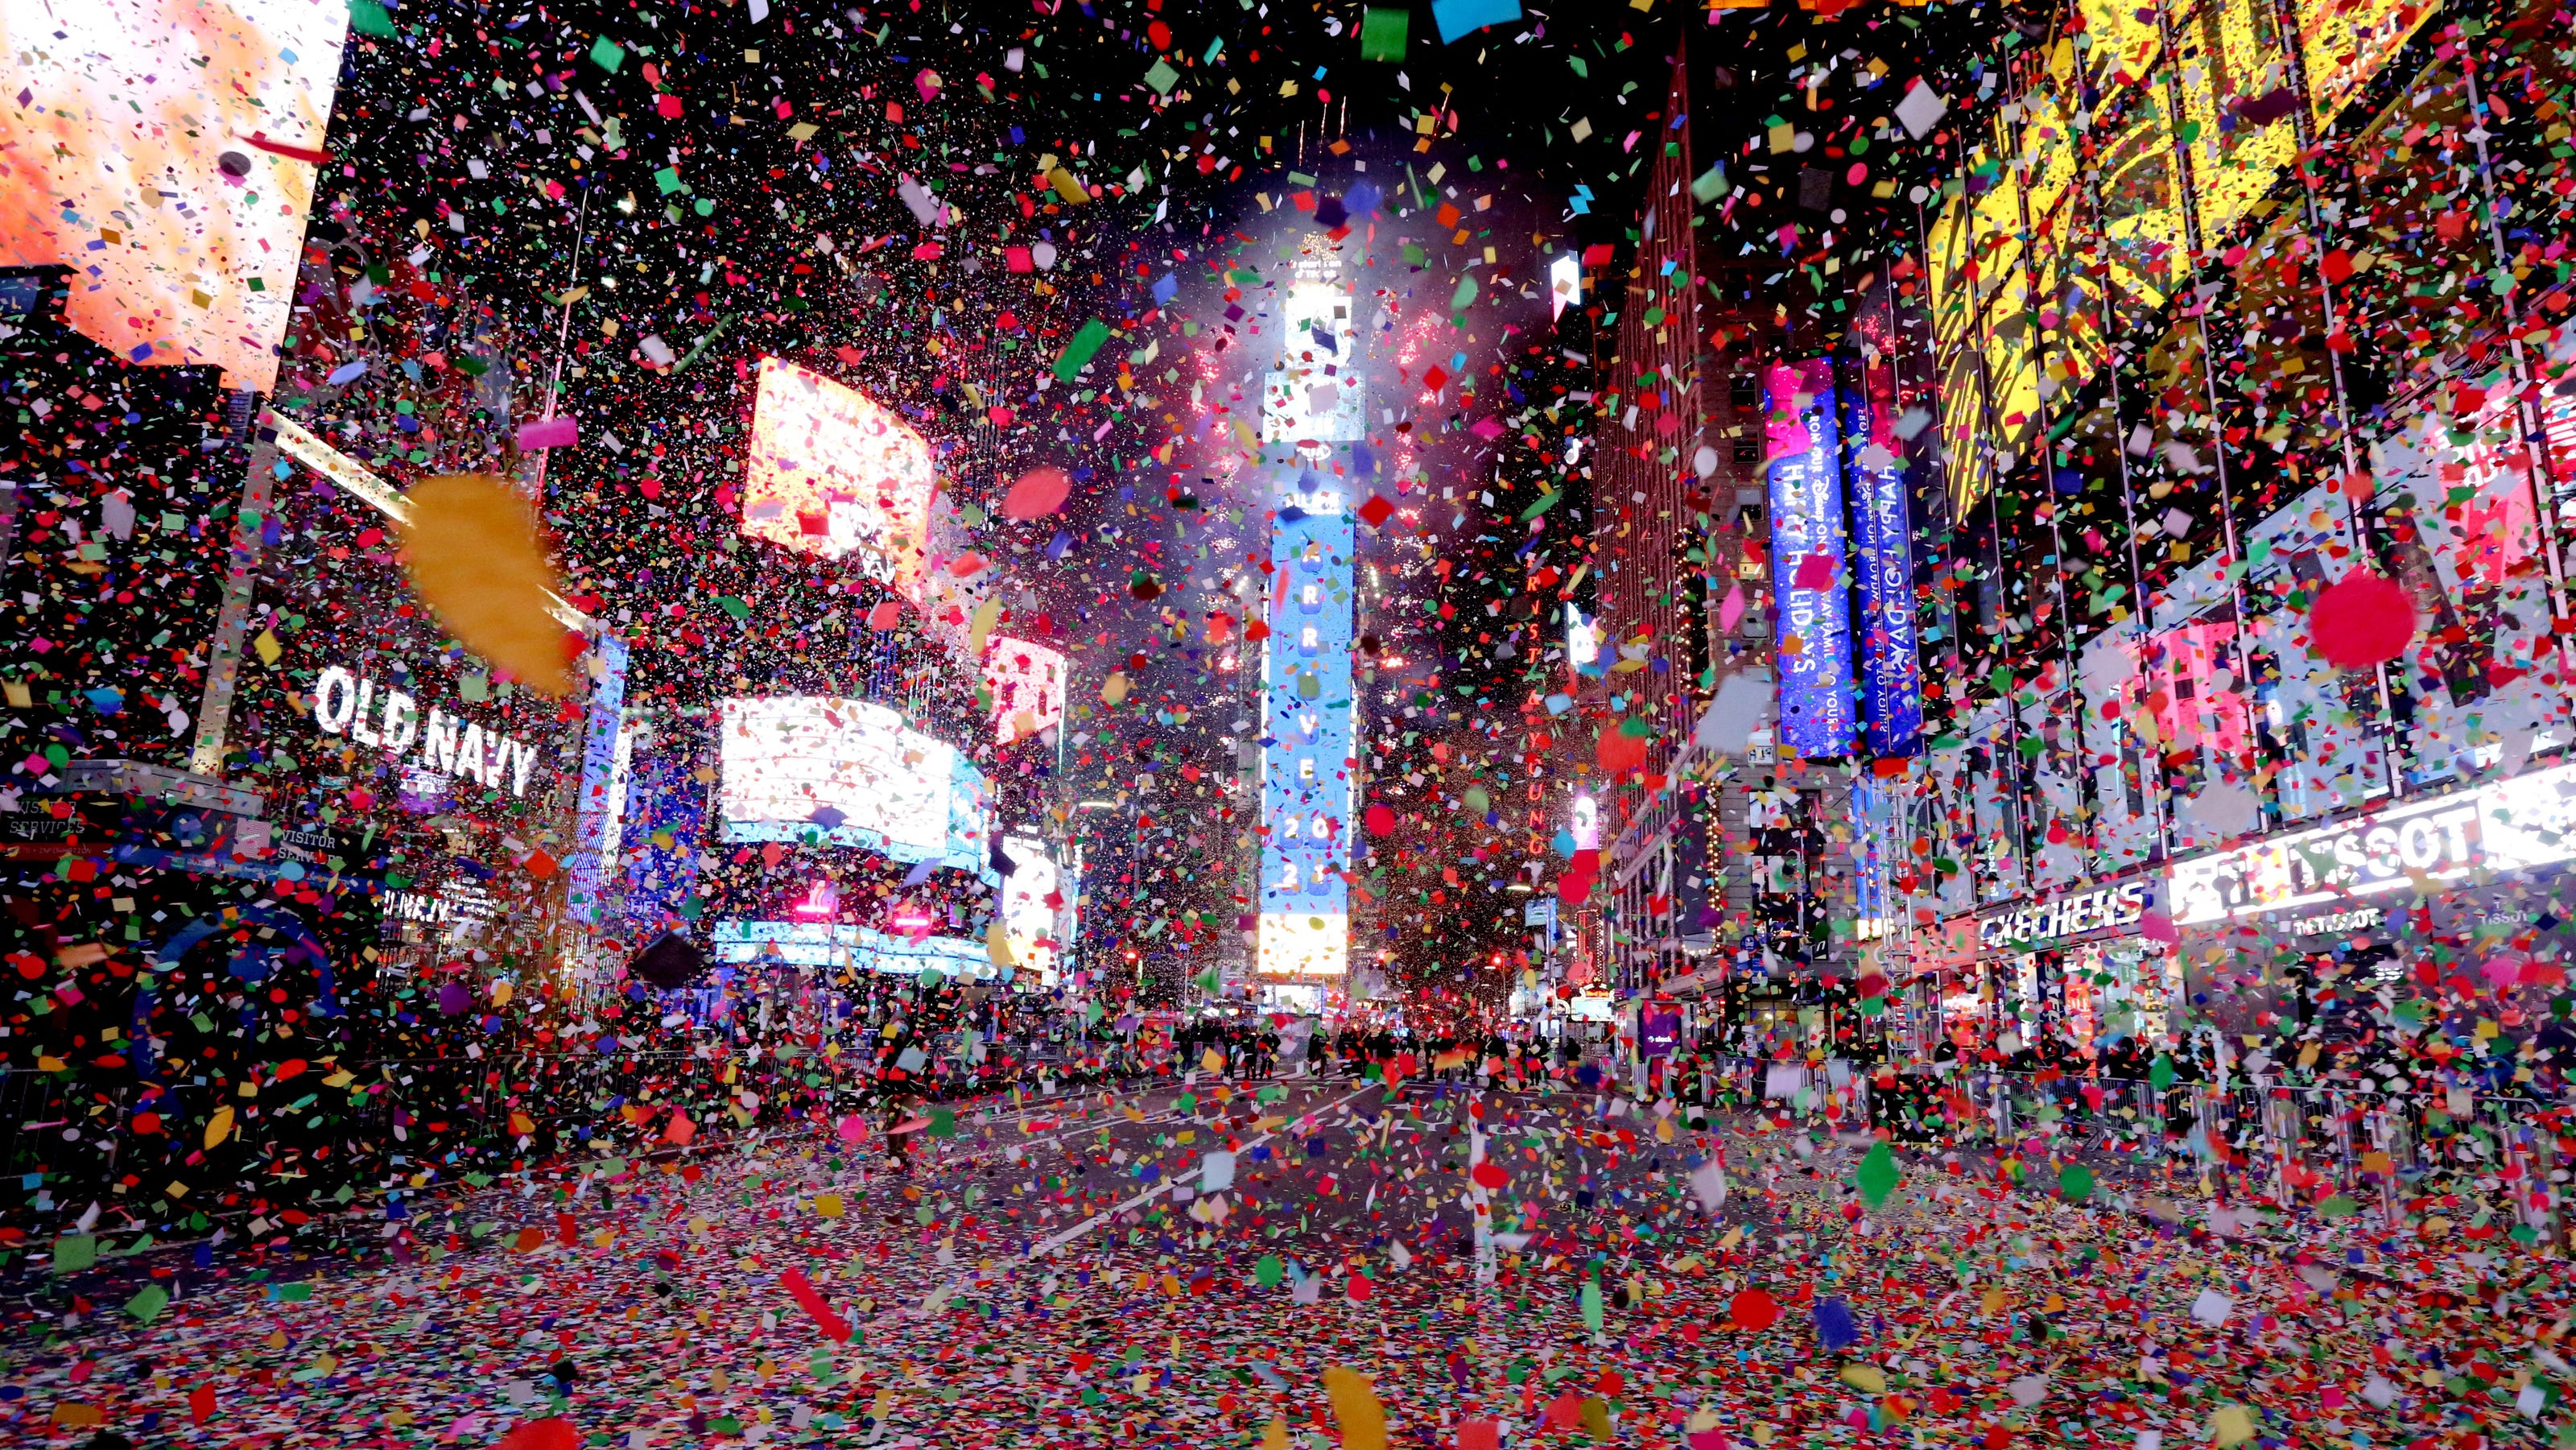 New York City hosting scaledback New Year's Eve Times Square party